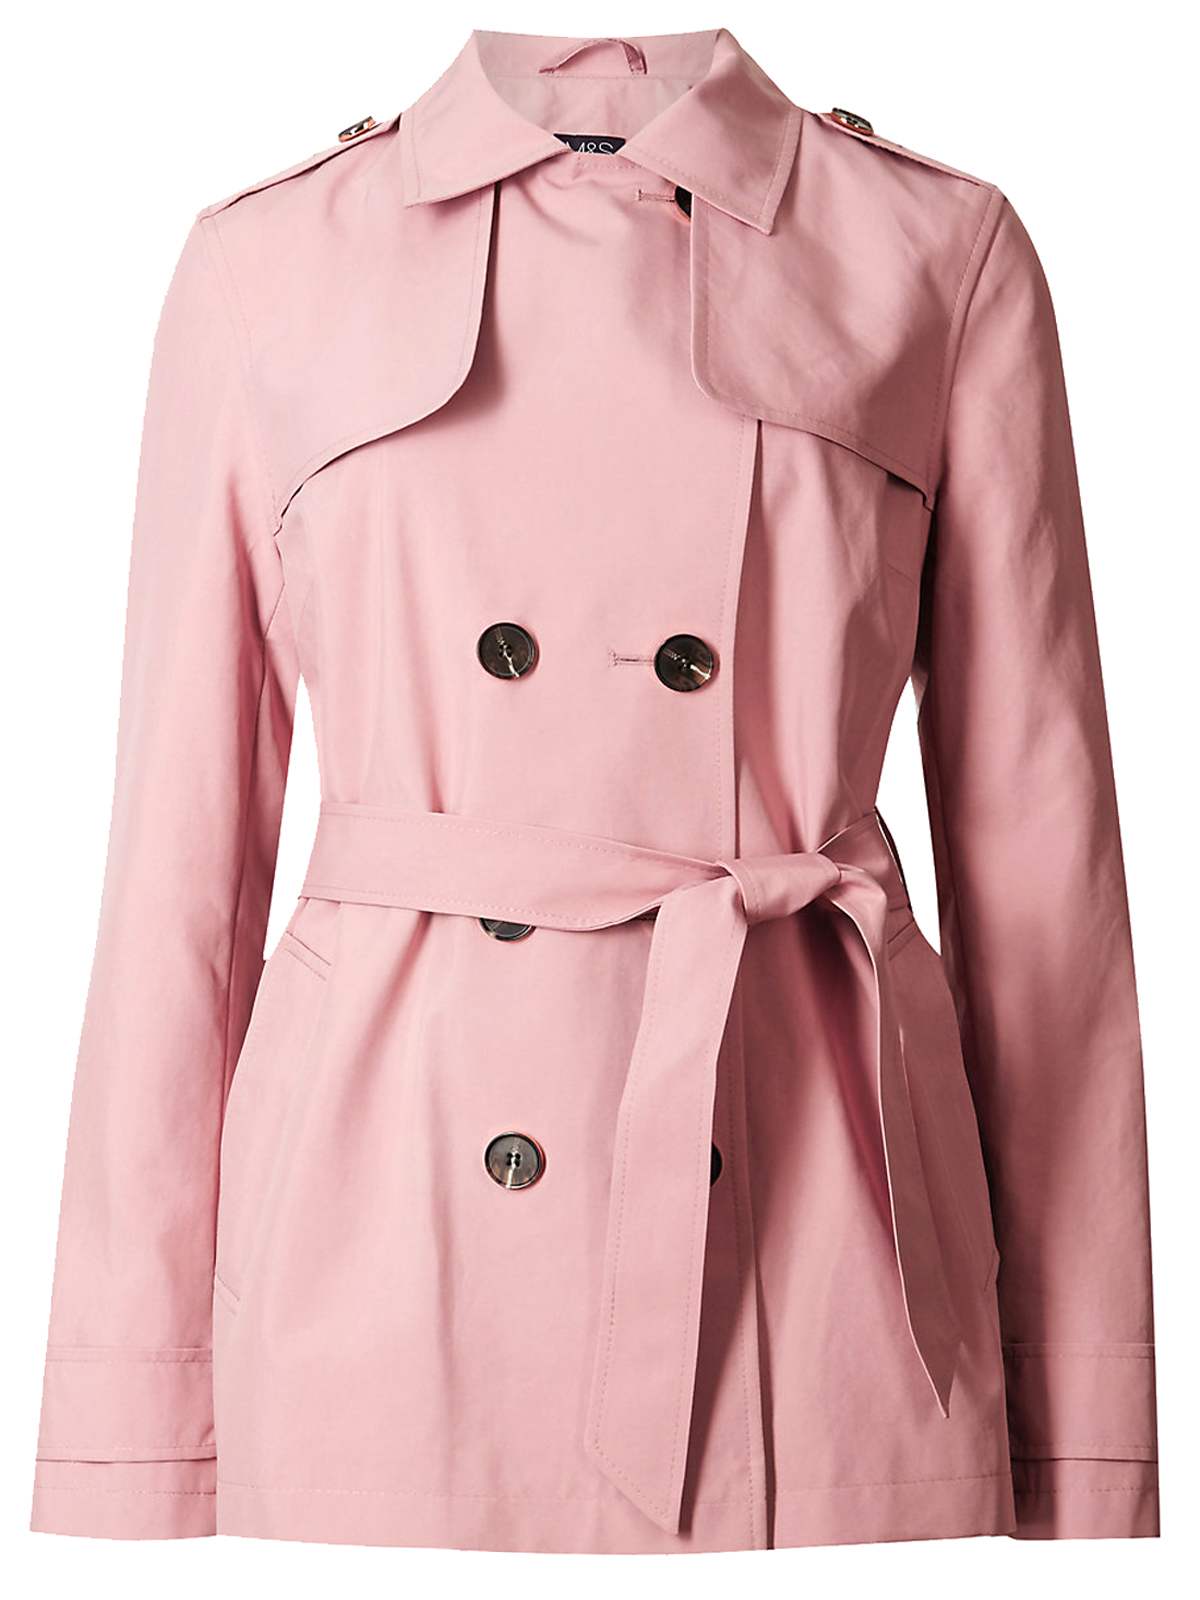 Marks and Spencer - - M&5 BLUSH-PINK Belted Trench Coat with Stormwear